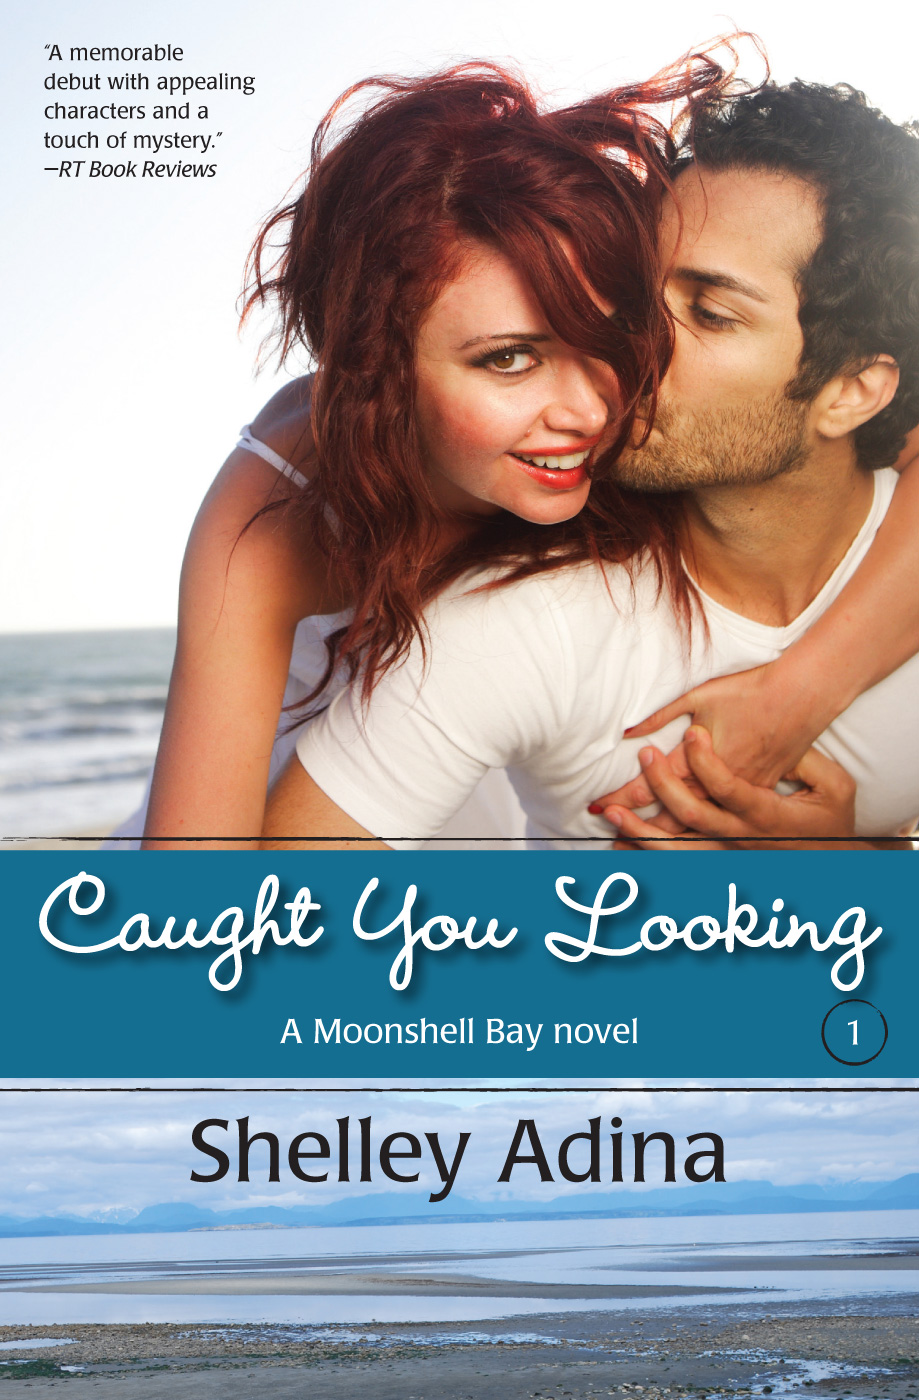 Caught You Looking by Shelley Adina